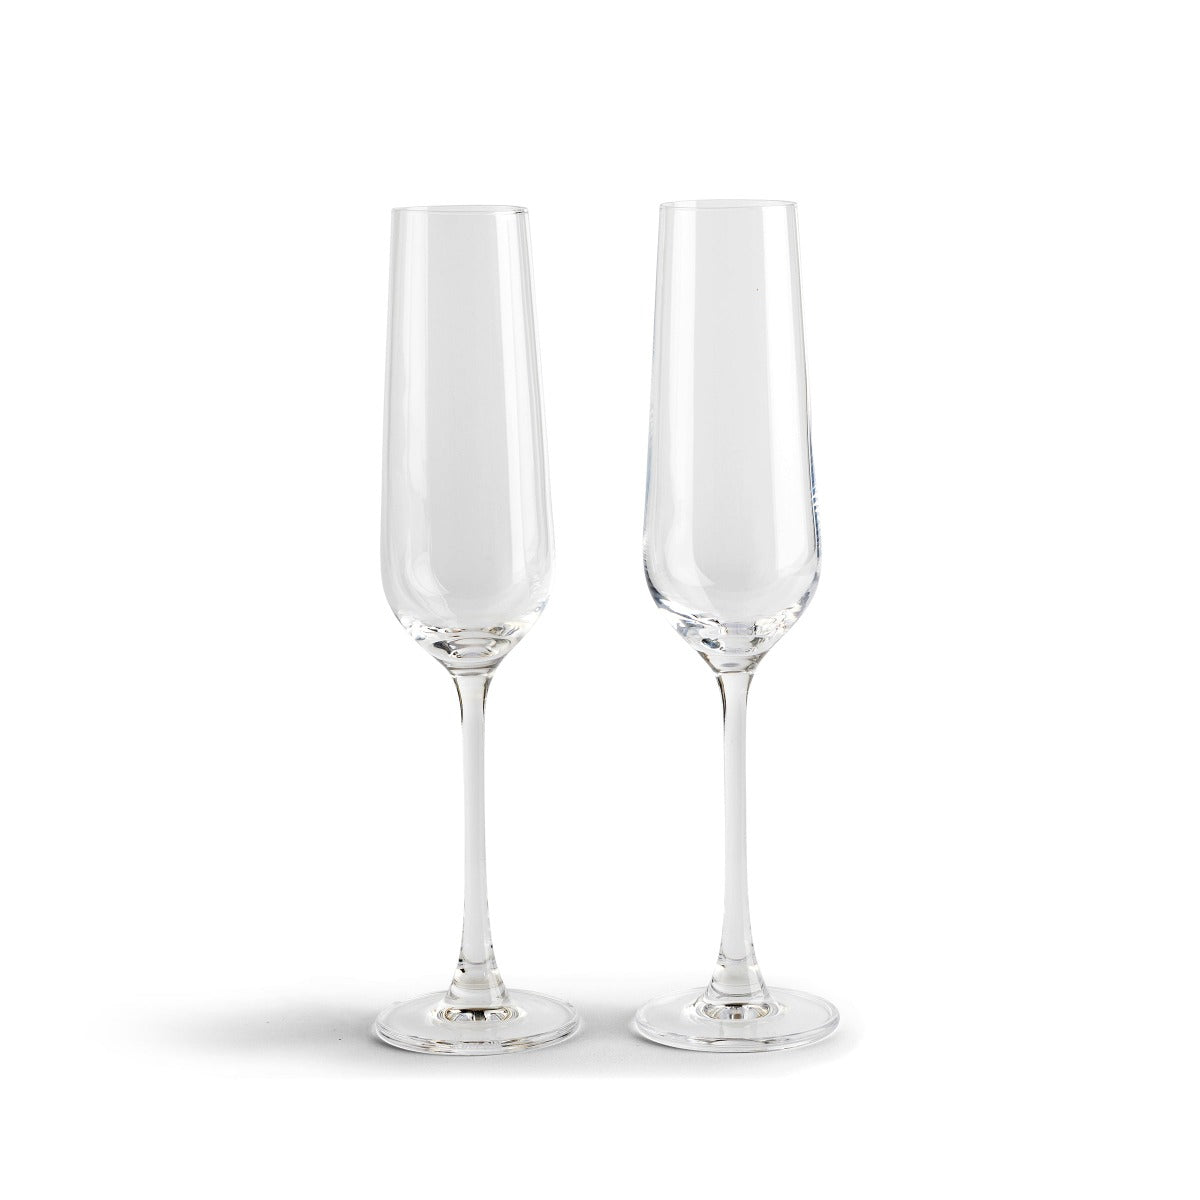 © Keltum | Official 2 Lead-Free Flutes, Champagne GreenPan of Crystal Set Store